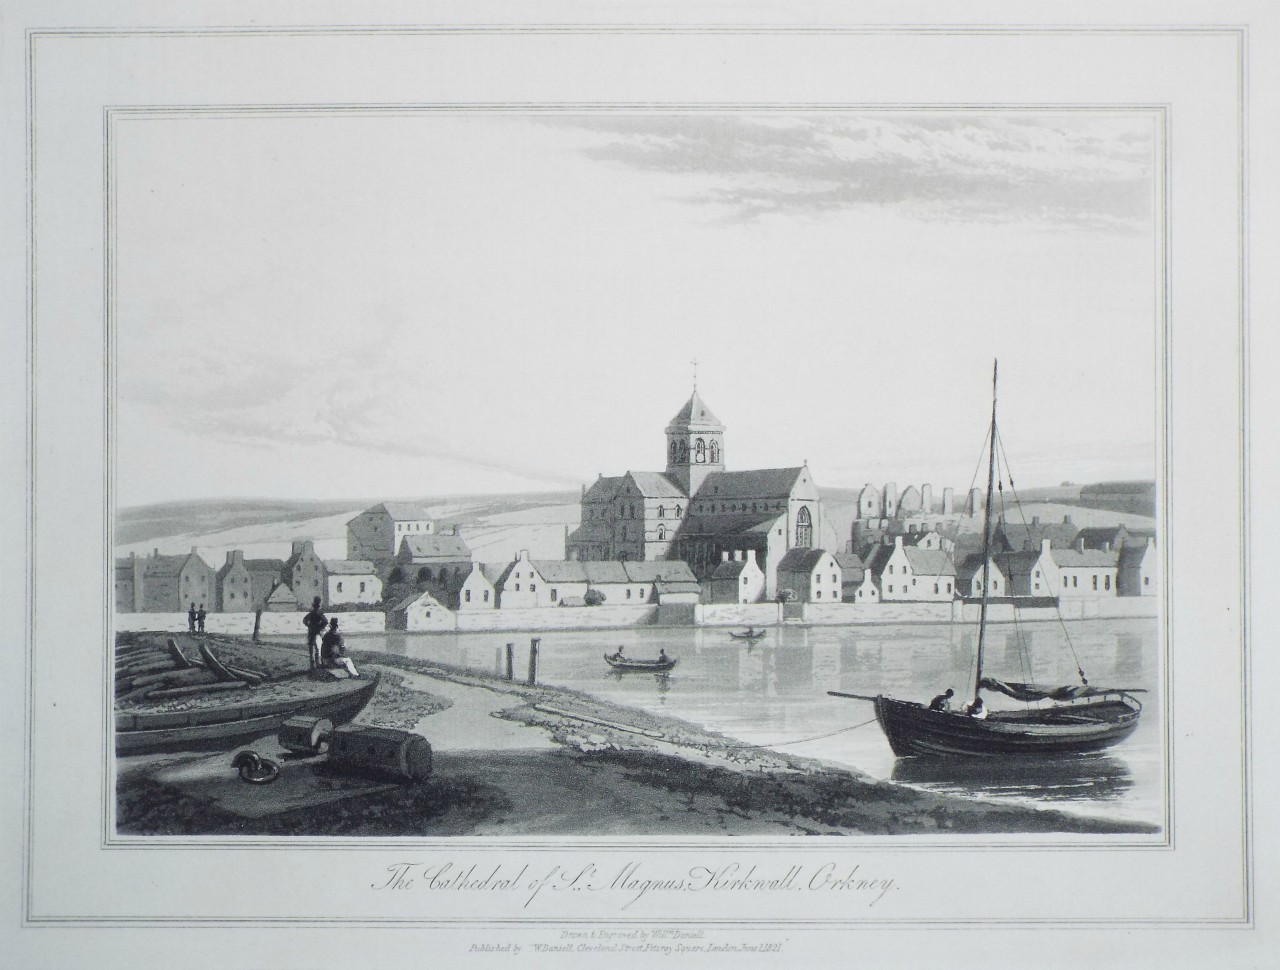 Aquatint - The Cathedral of St. Magnus, Kirkwall, Orkney. - Daniell